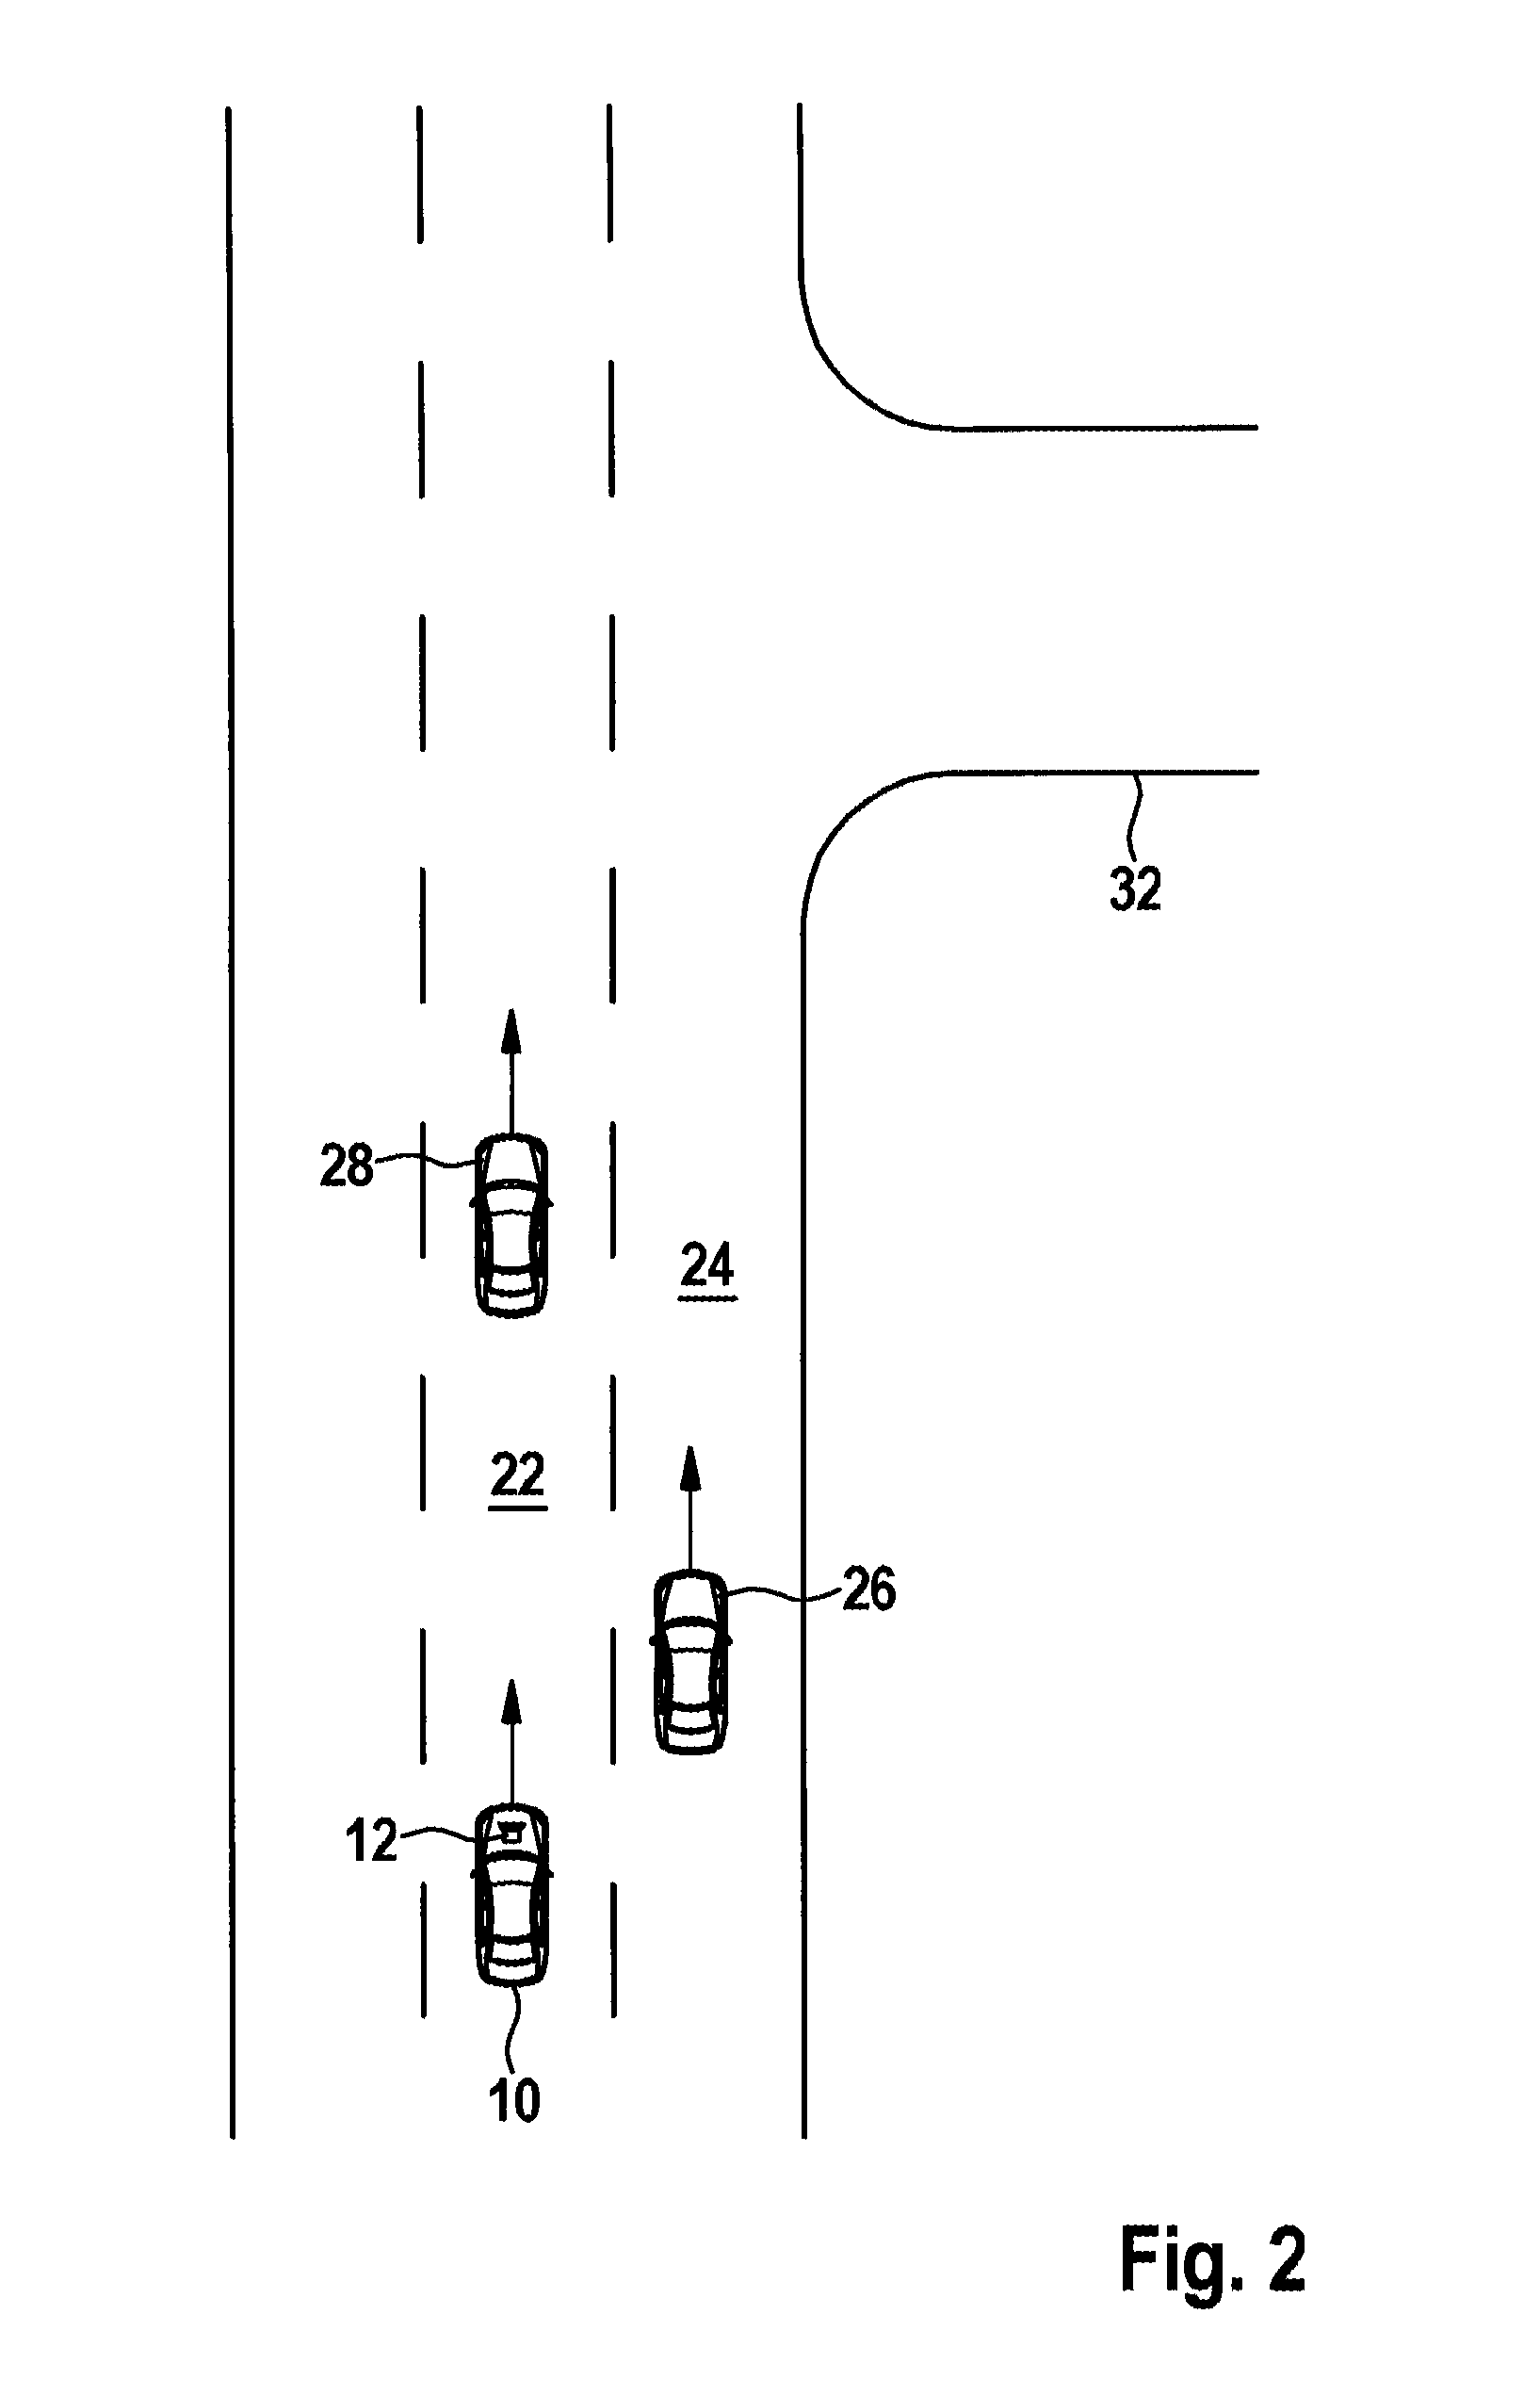 Driver assistance system for motor vehicles